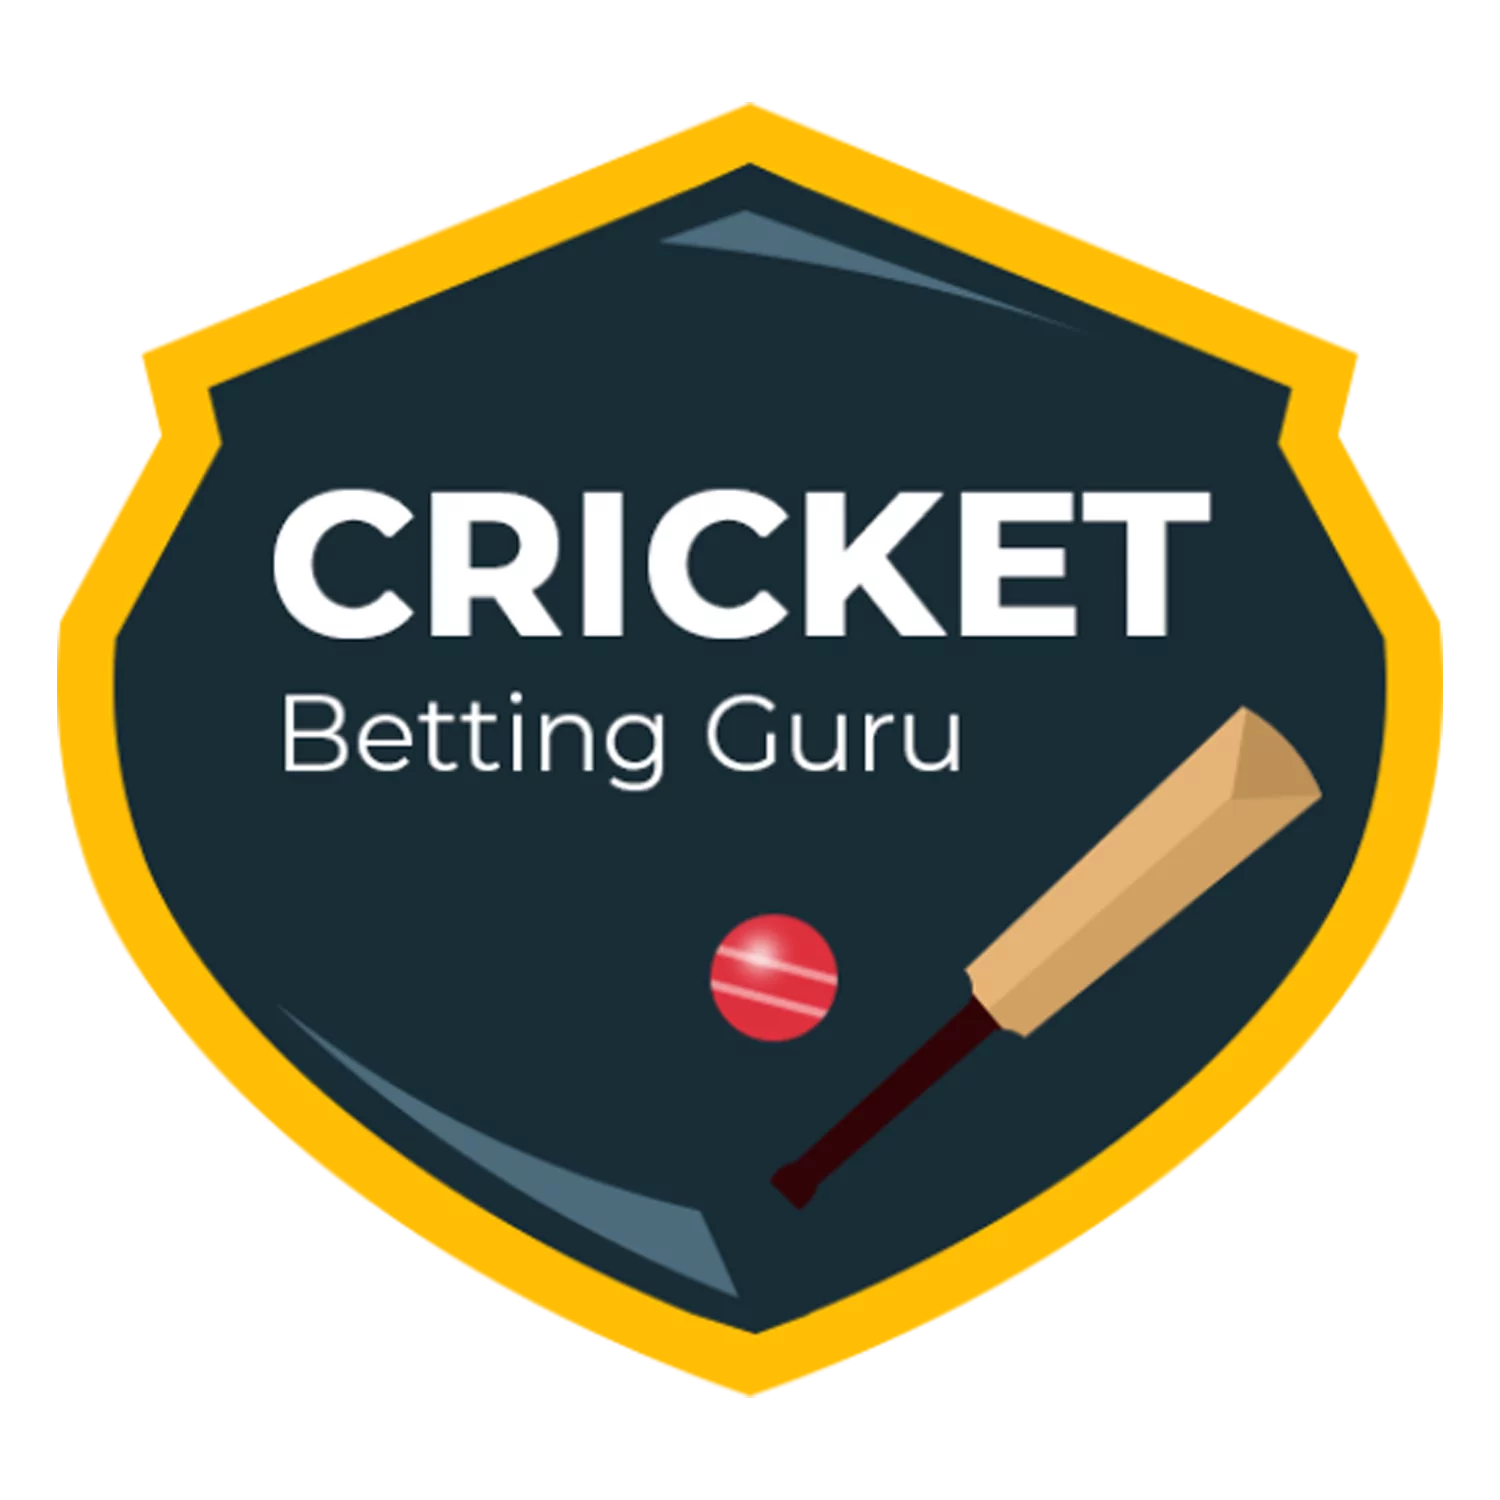 Our website has the latest information on cricket betting in India.